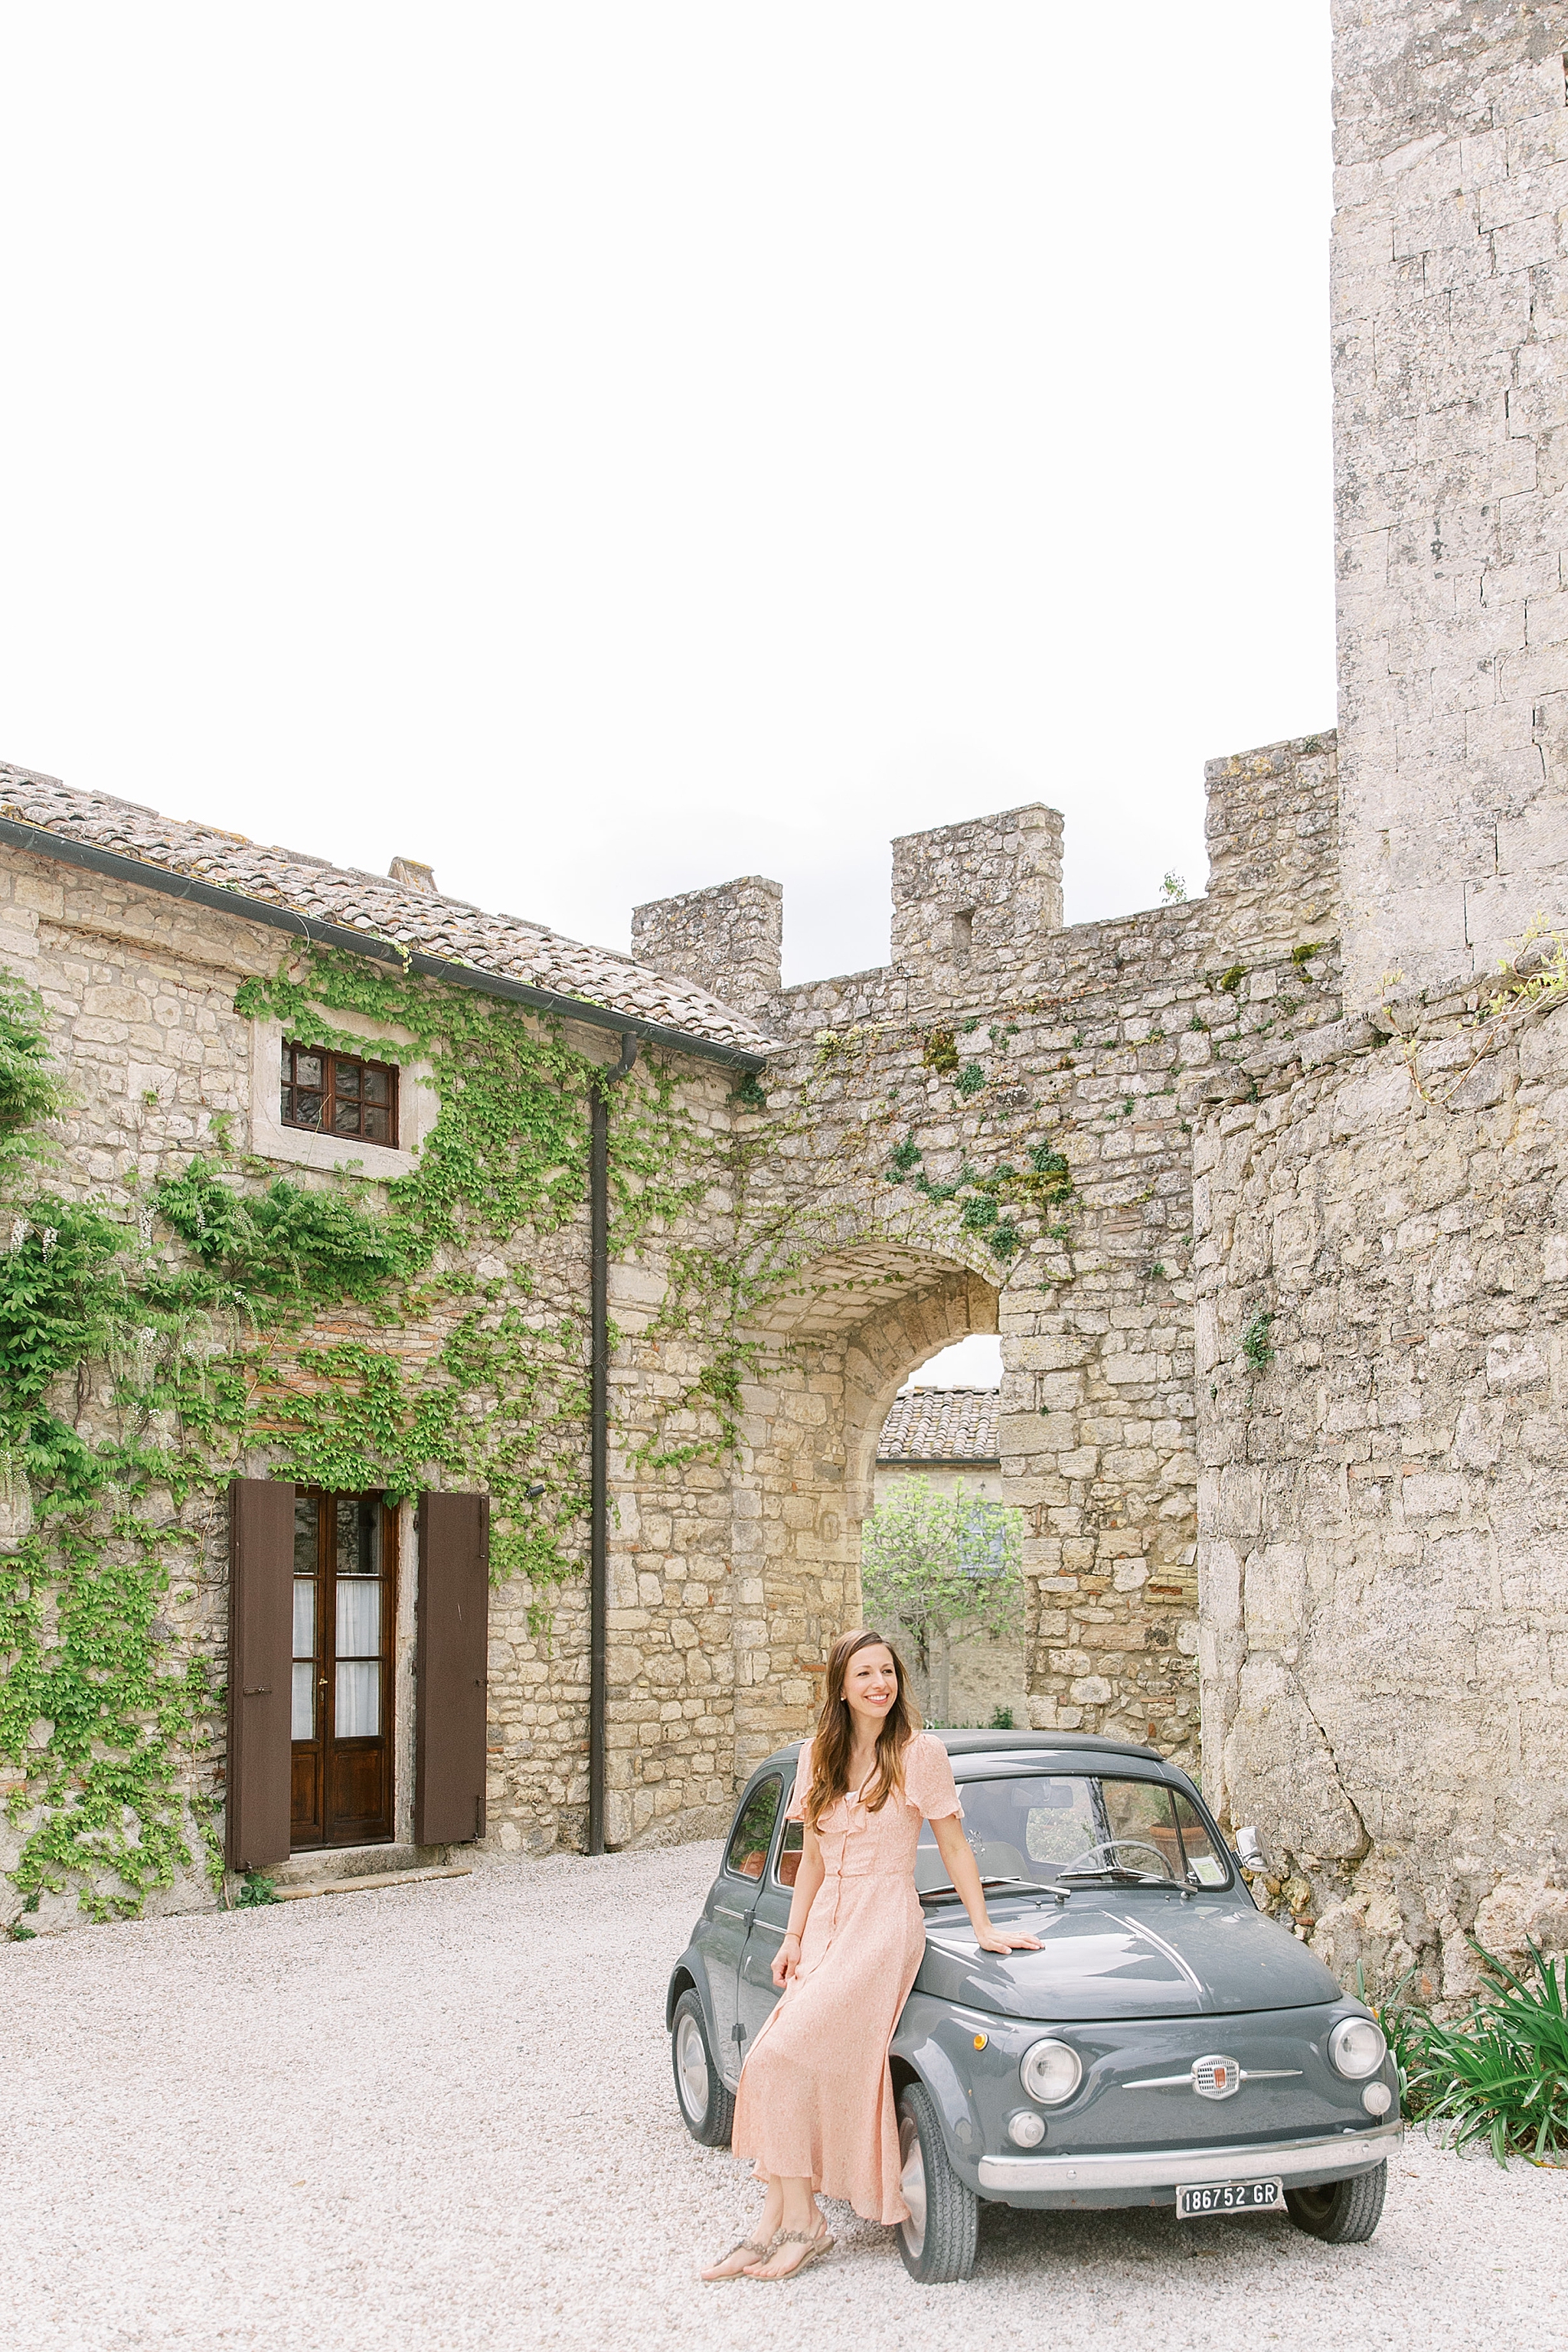 Destination wedding photographer, Alicia Lacey, travels to the heart of Tuscany, including San Gimignano, Volterra, Borgo Pignano, and the Val d'Orcia Region.